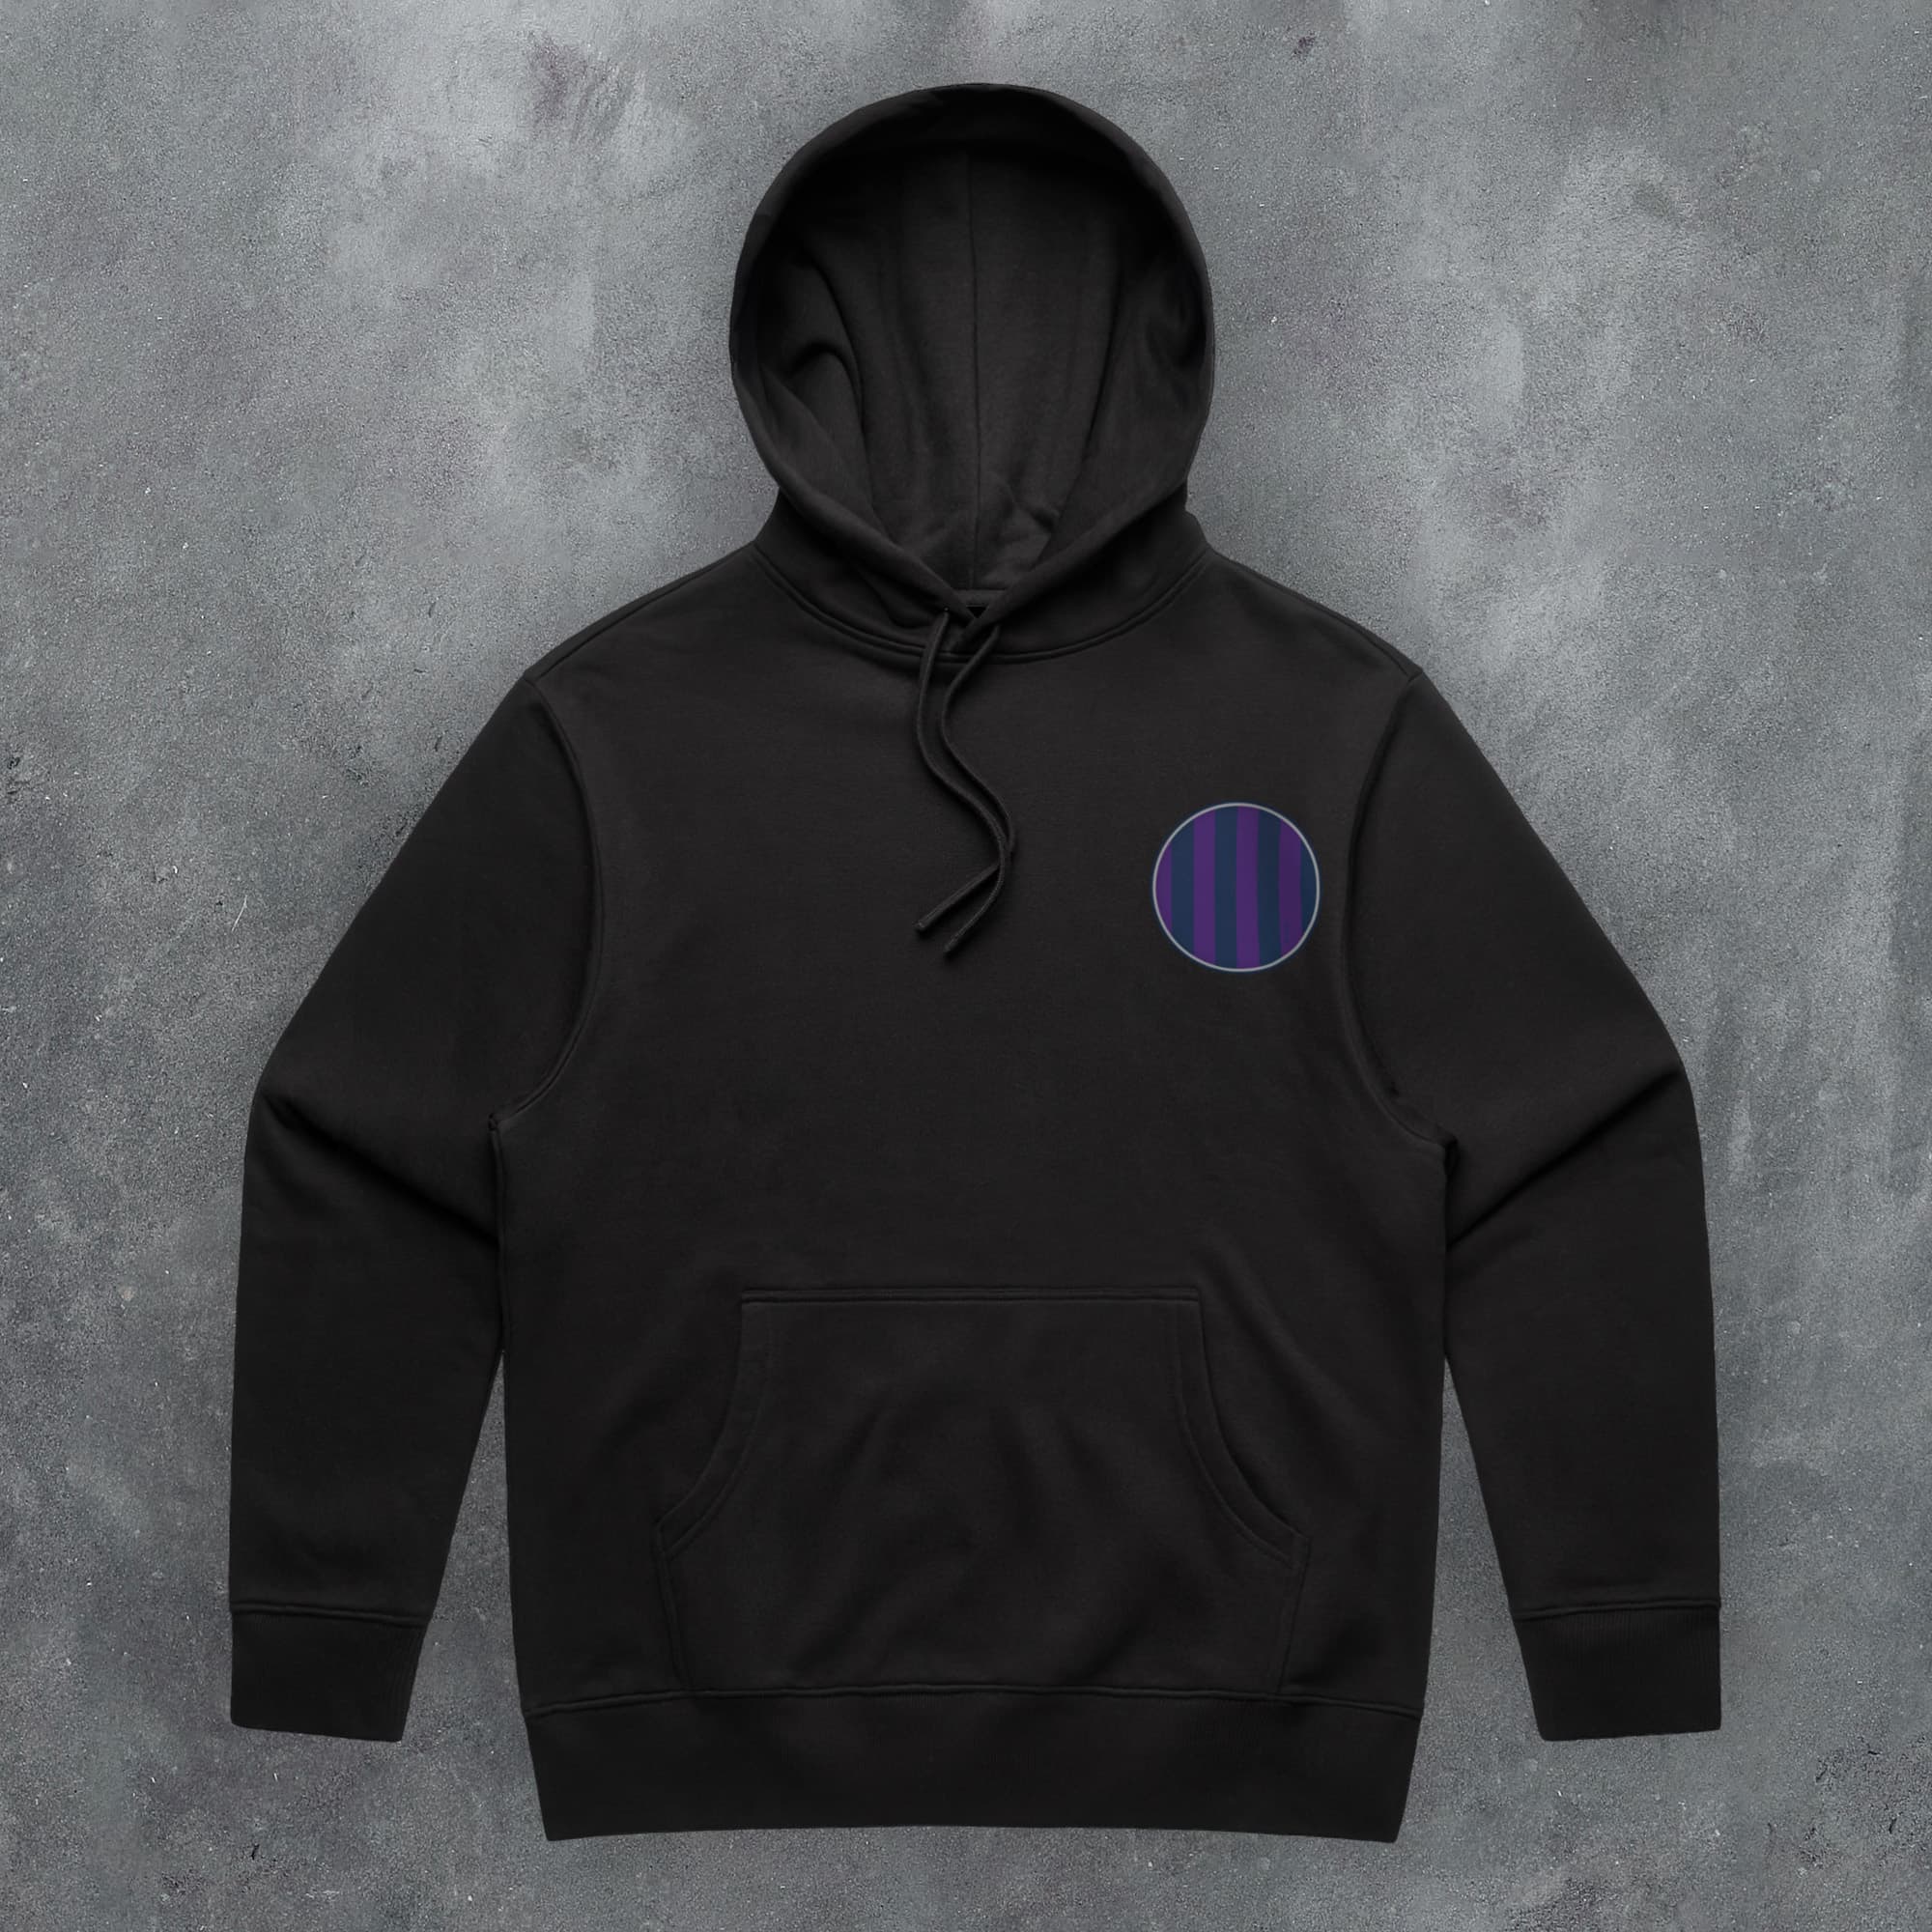 a black hoodie with a purple circle on it